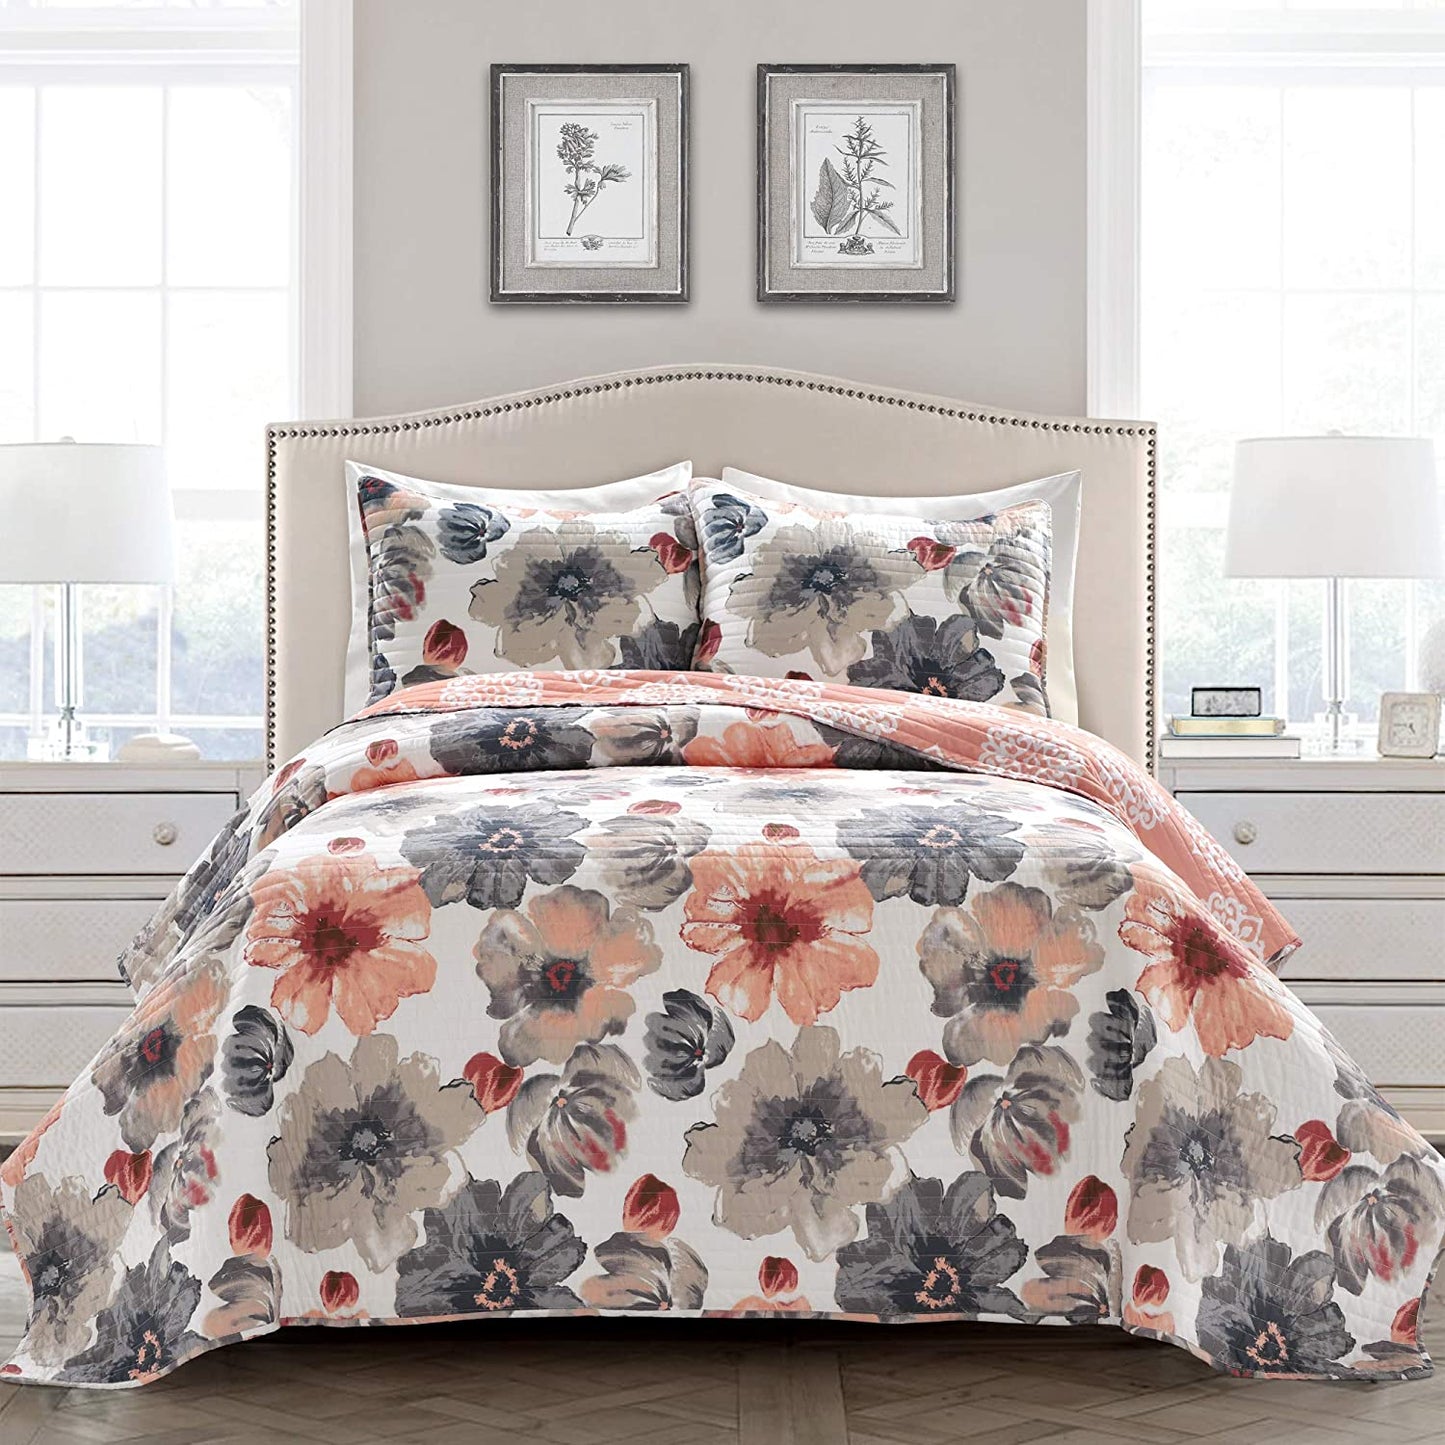 Coral & Gray Splash-Ink Painting Floral Patchwork 3 Pieces Quilt Set Coverlet with 2 Pillowcasess